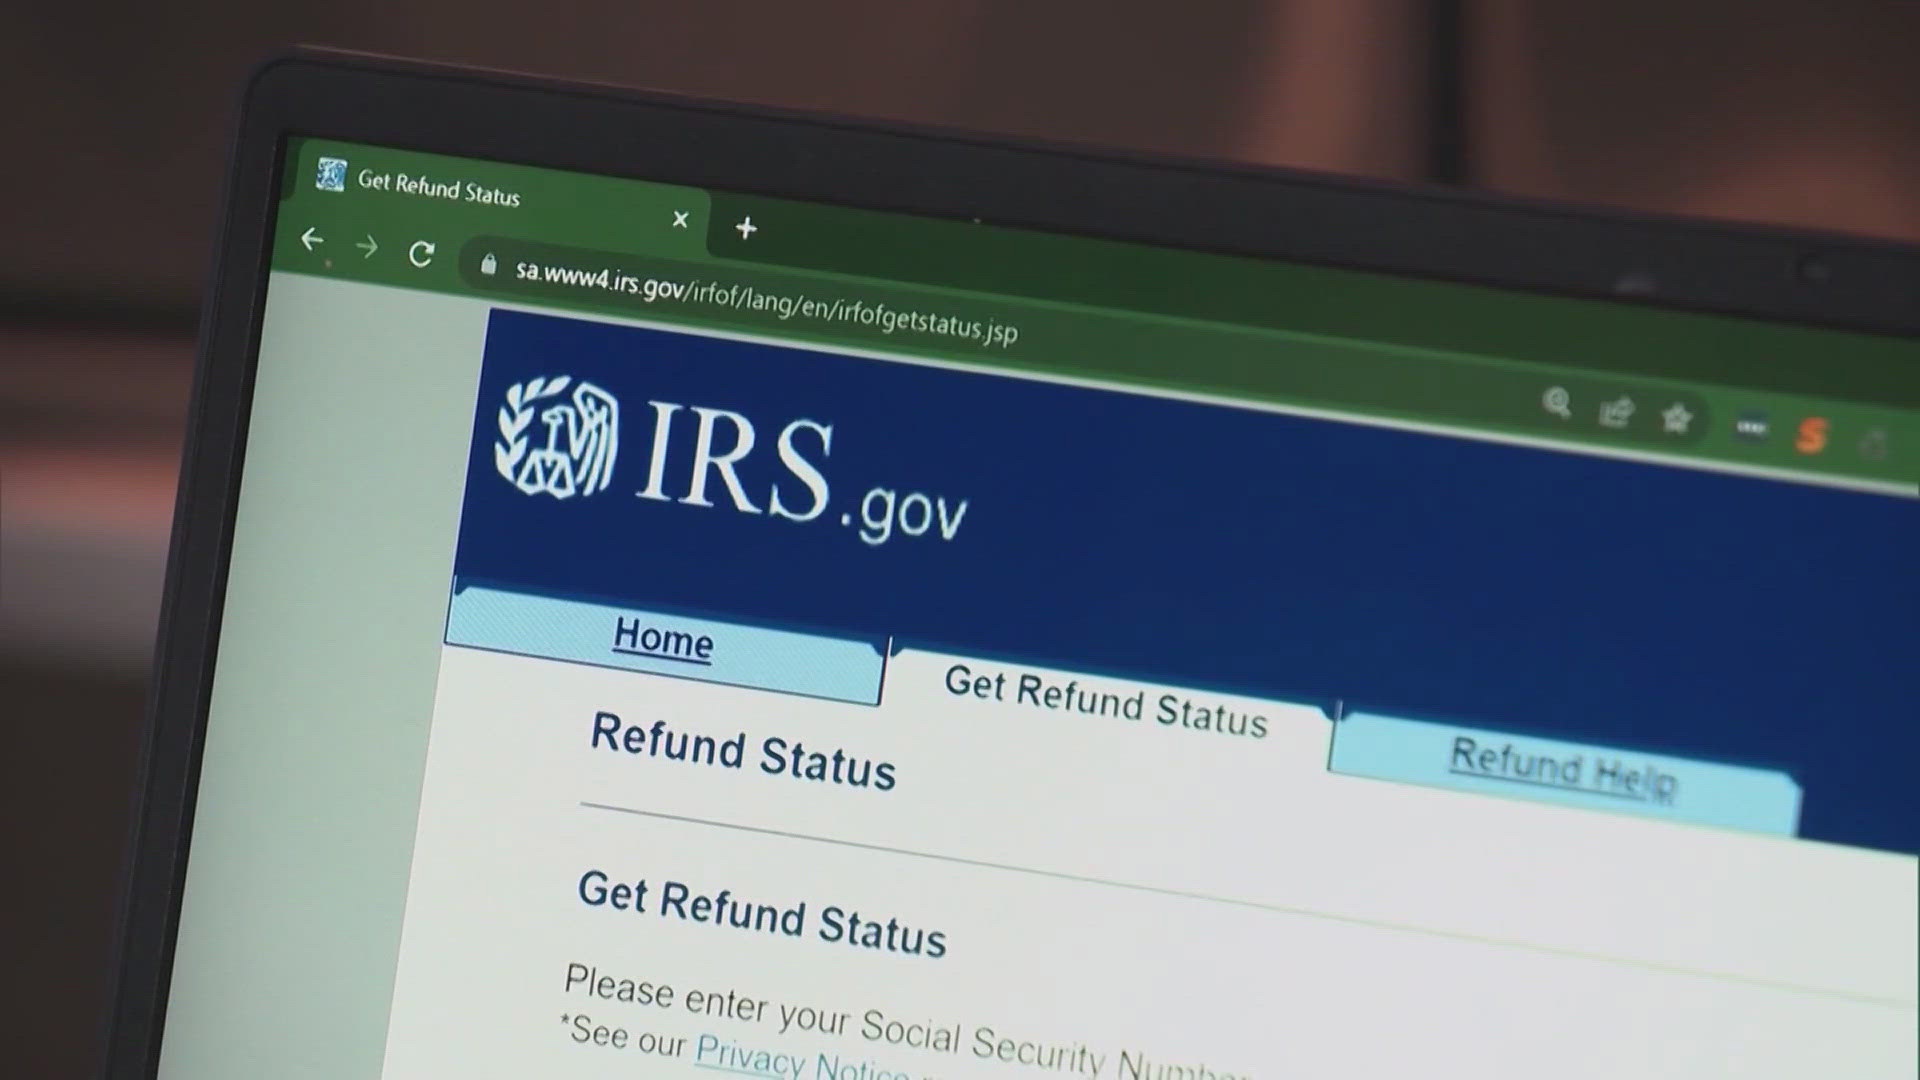 May 17 is the last day for people to file their 2020 tax return and still get a refund.